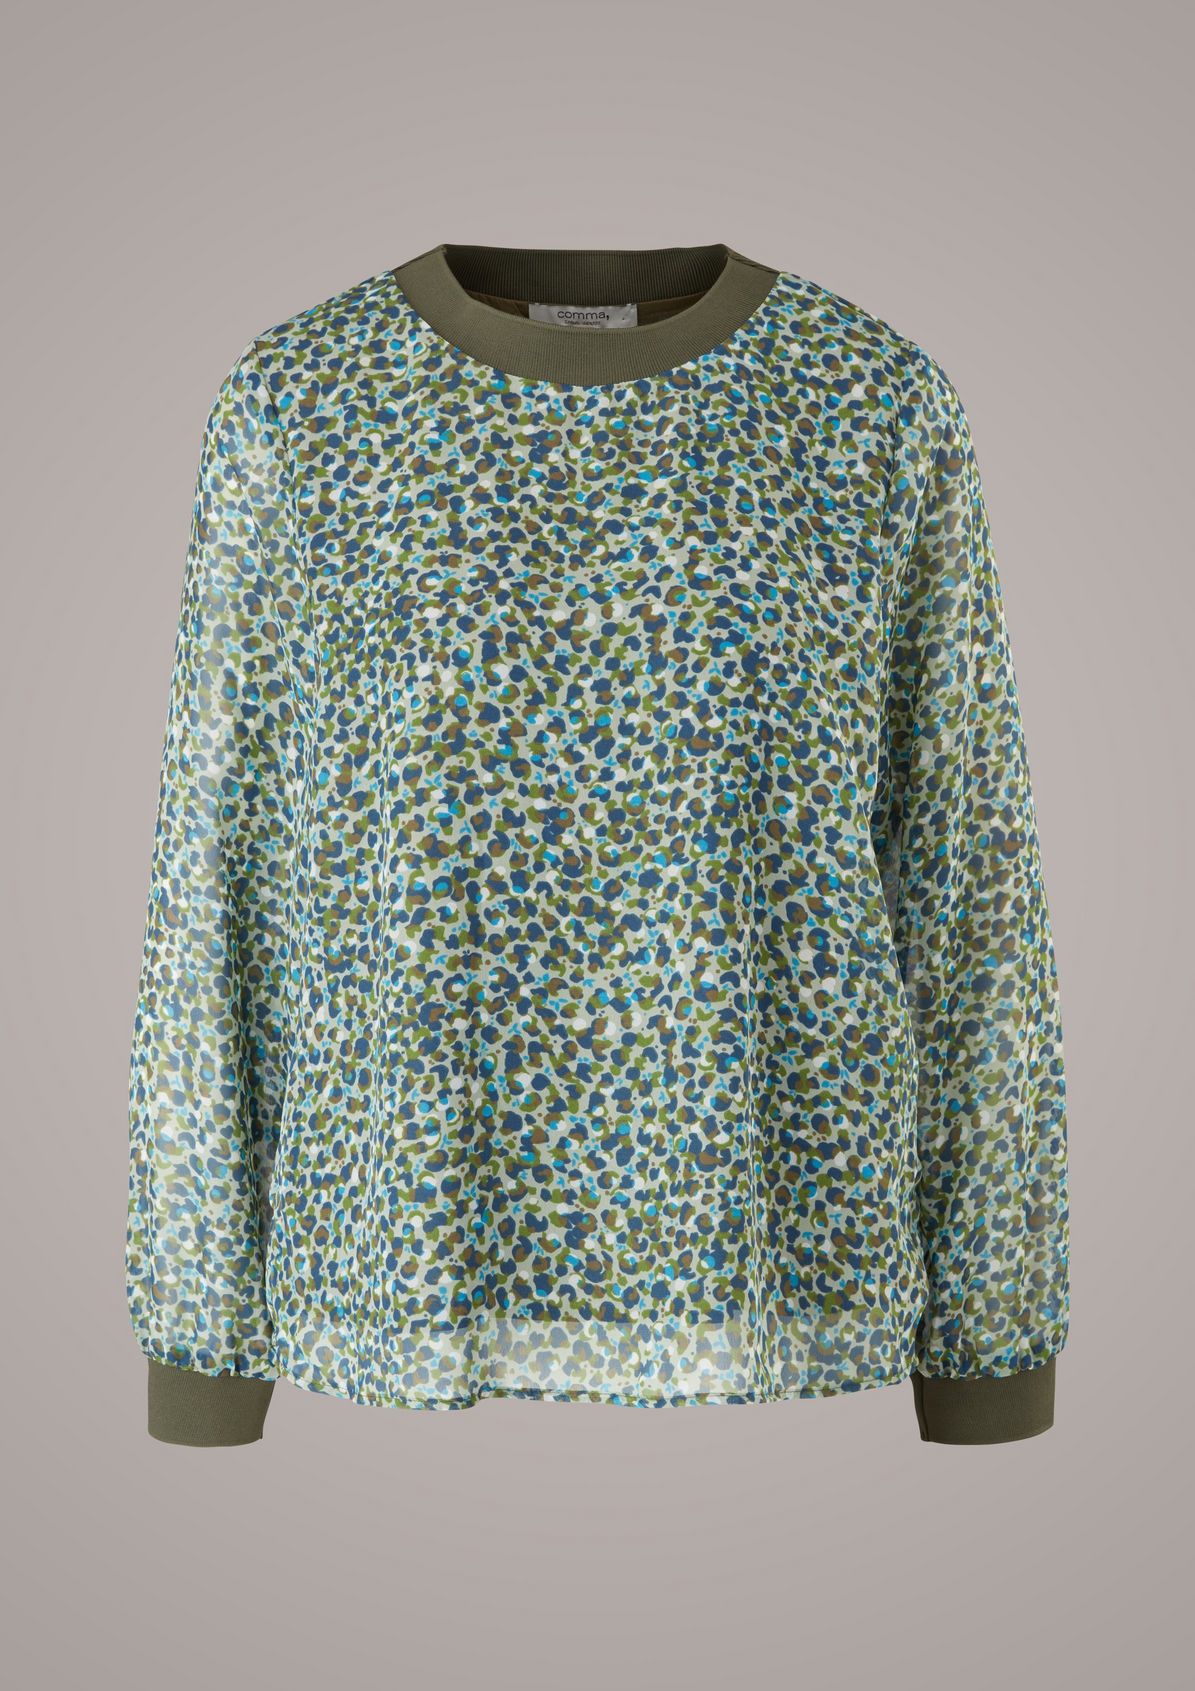 Patterned blouse with ribbed details from comma